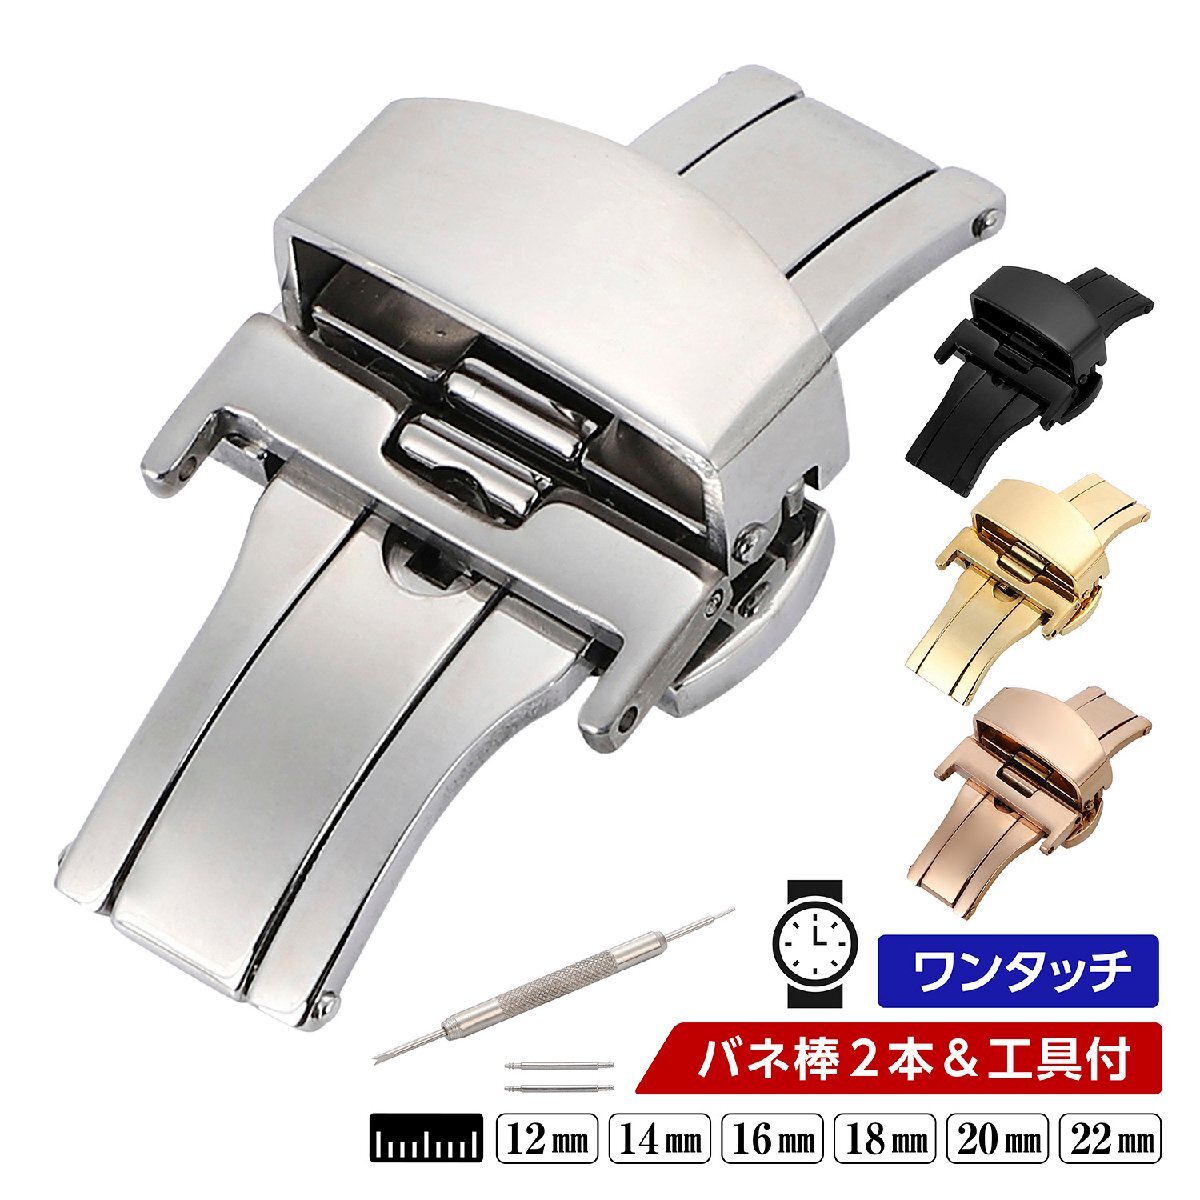 D buckle wristwatch 12mm silver push type double doors stainless steel exchange tool & spring stick 2 ps attaching 